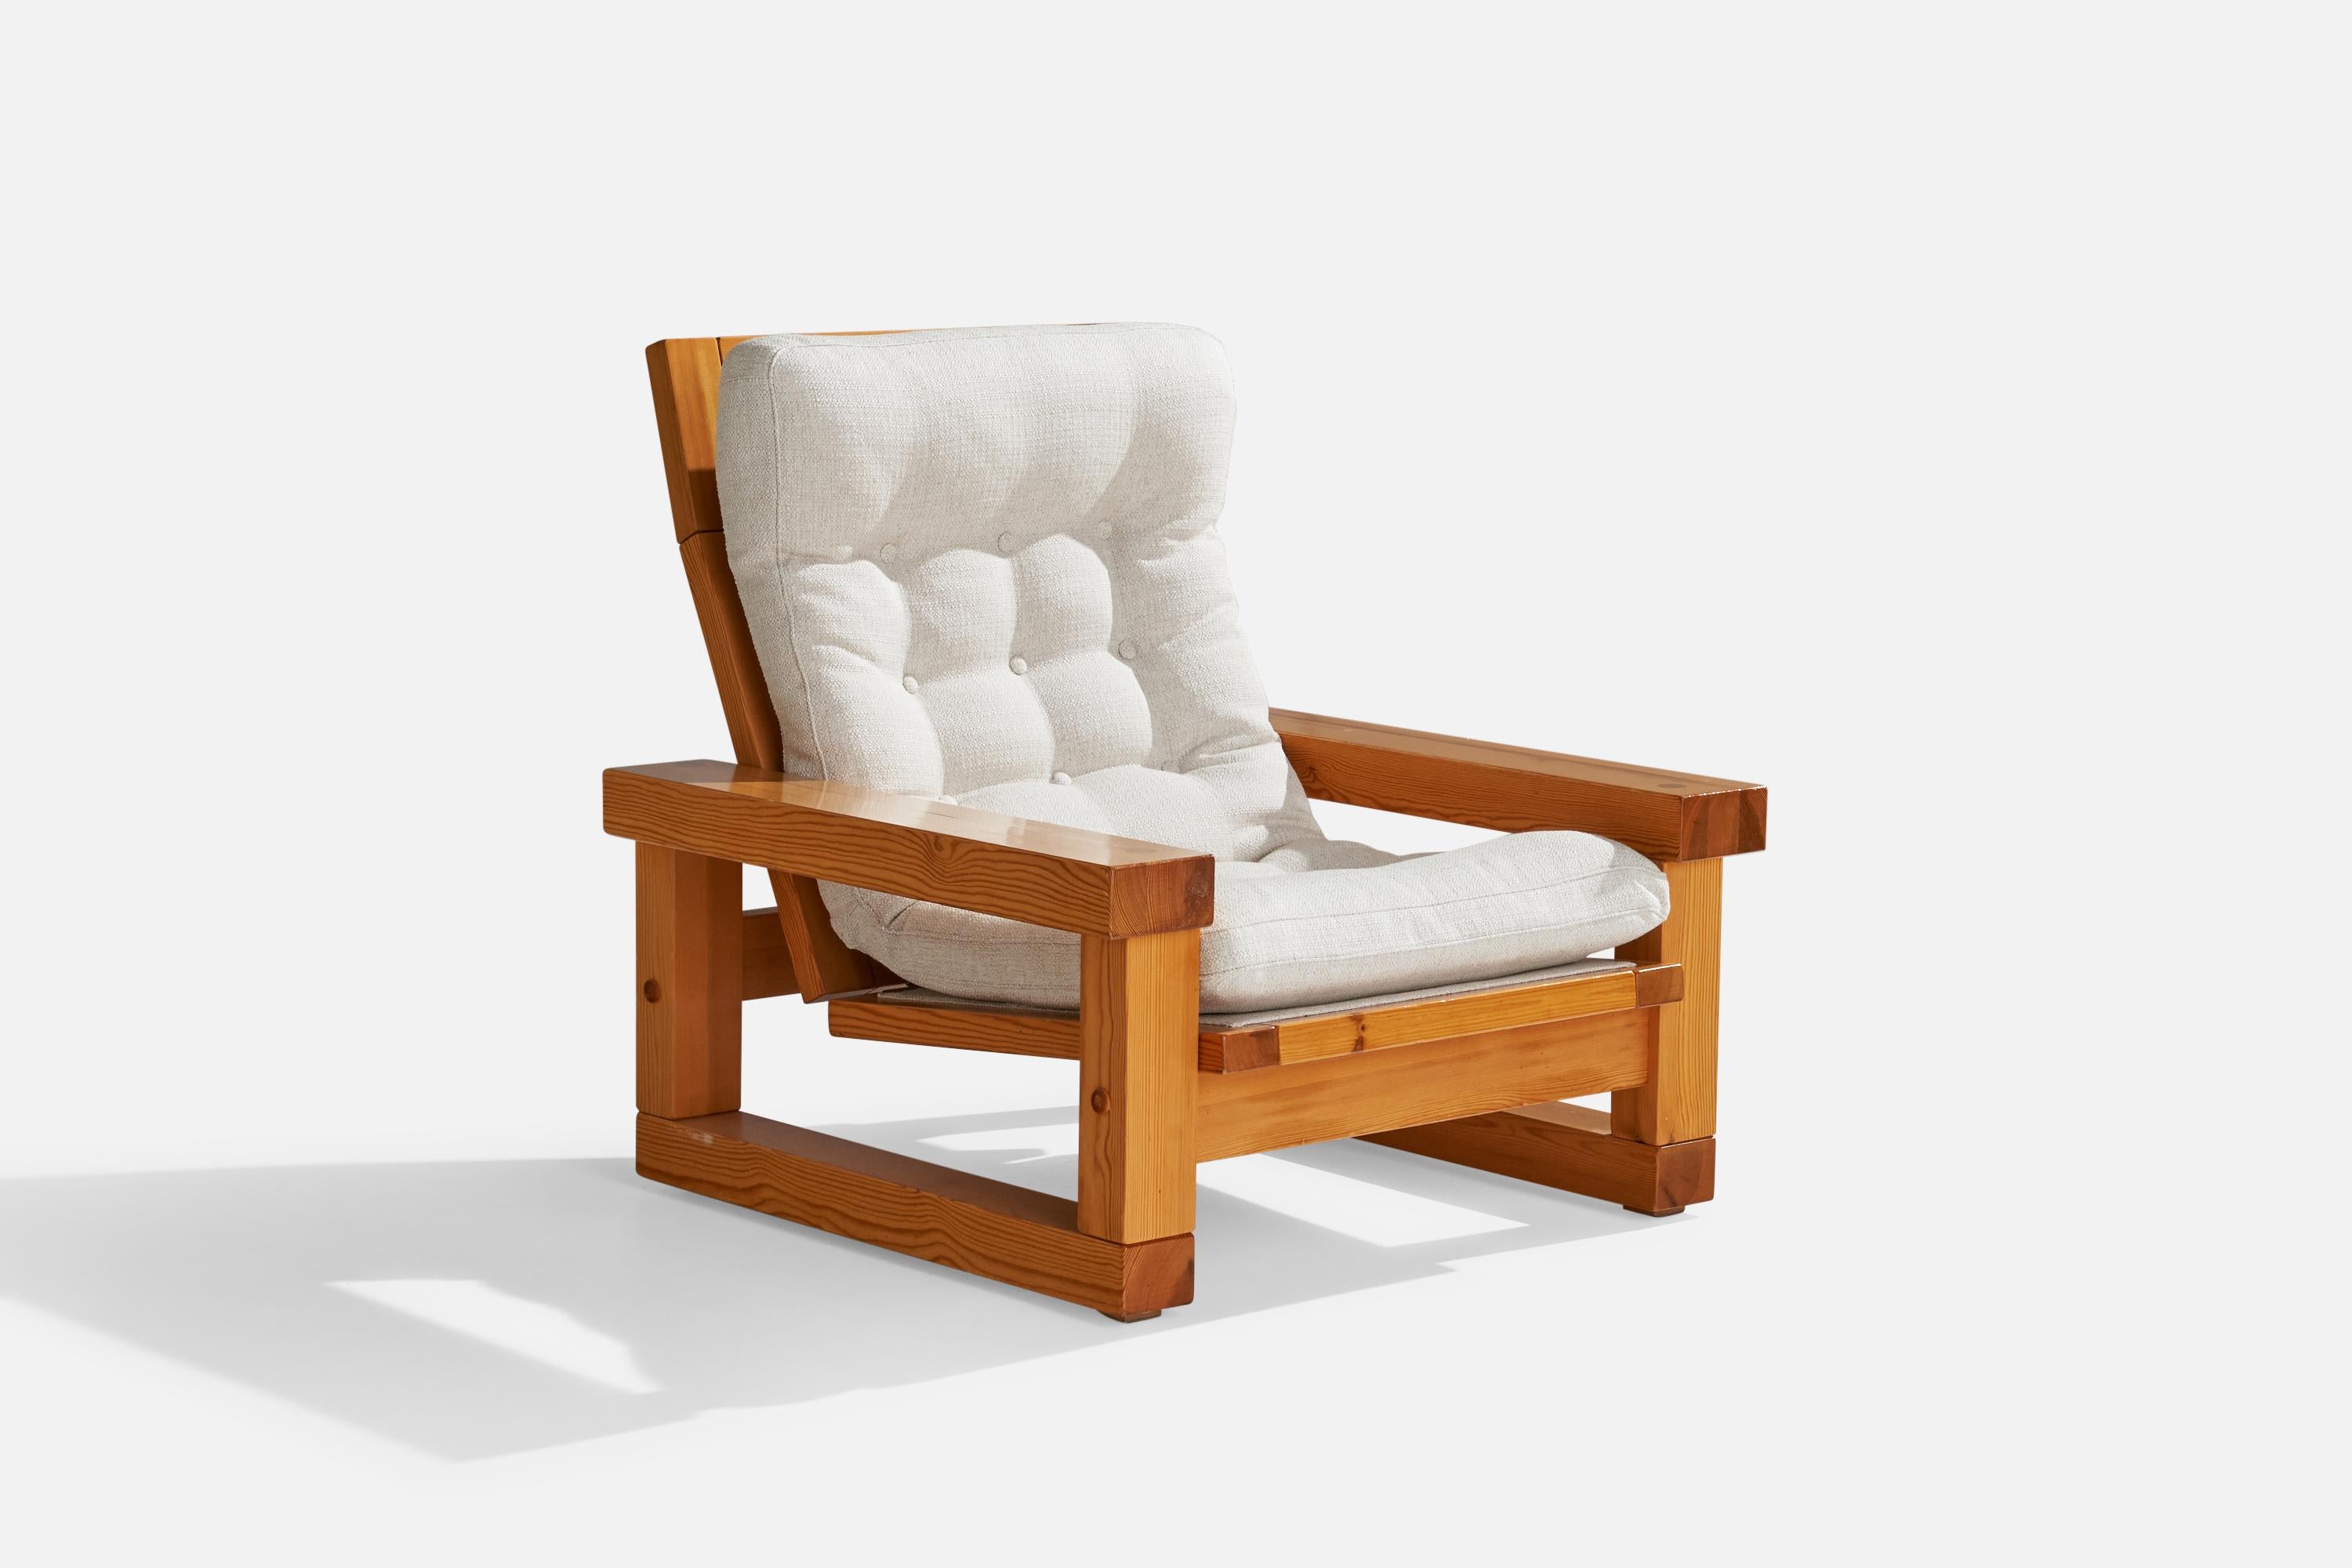 An adjustable pine and white fabric lounge chair designed by Christer Lundén and produced by Broby Nya Möbler AB, Sunne, Sweden, 1974.

Seat height 15”.